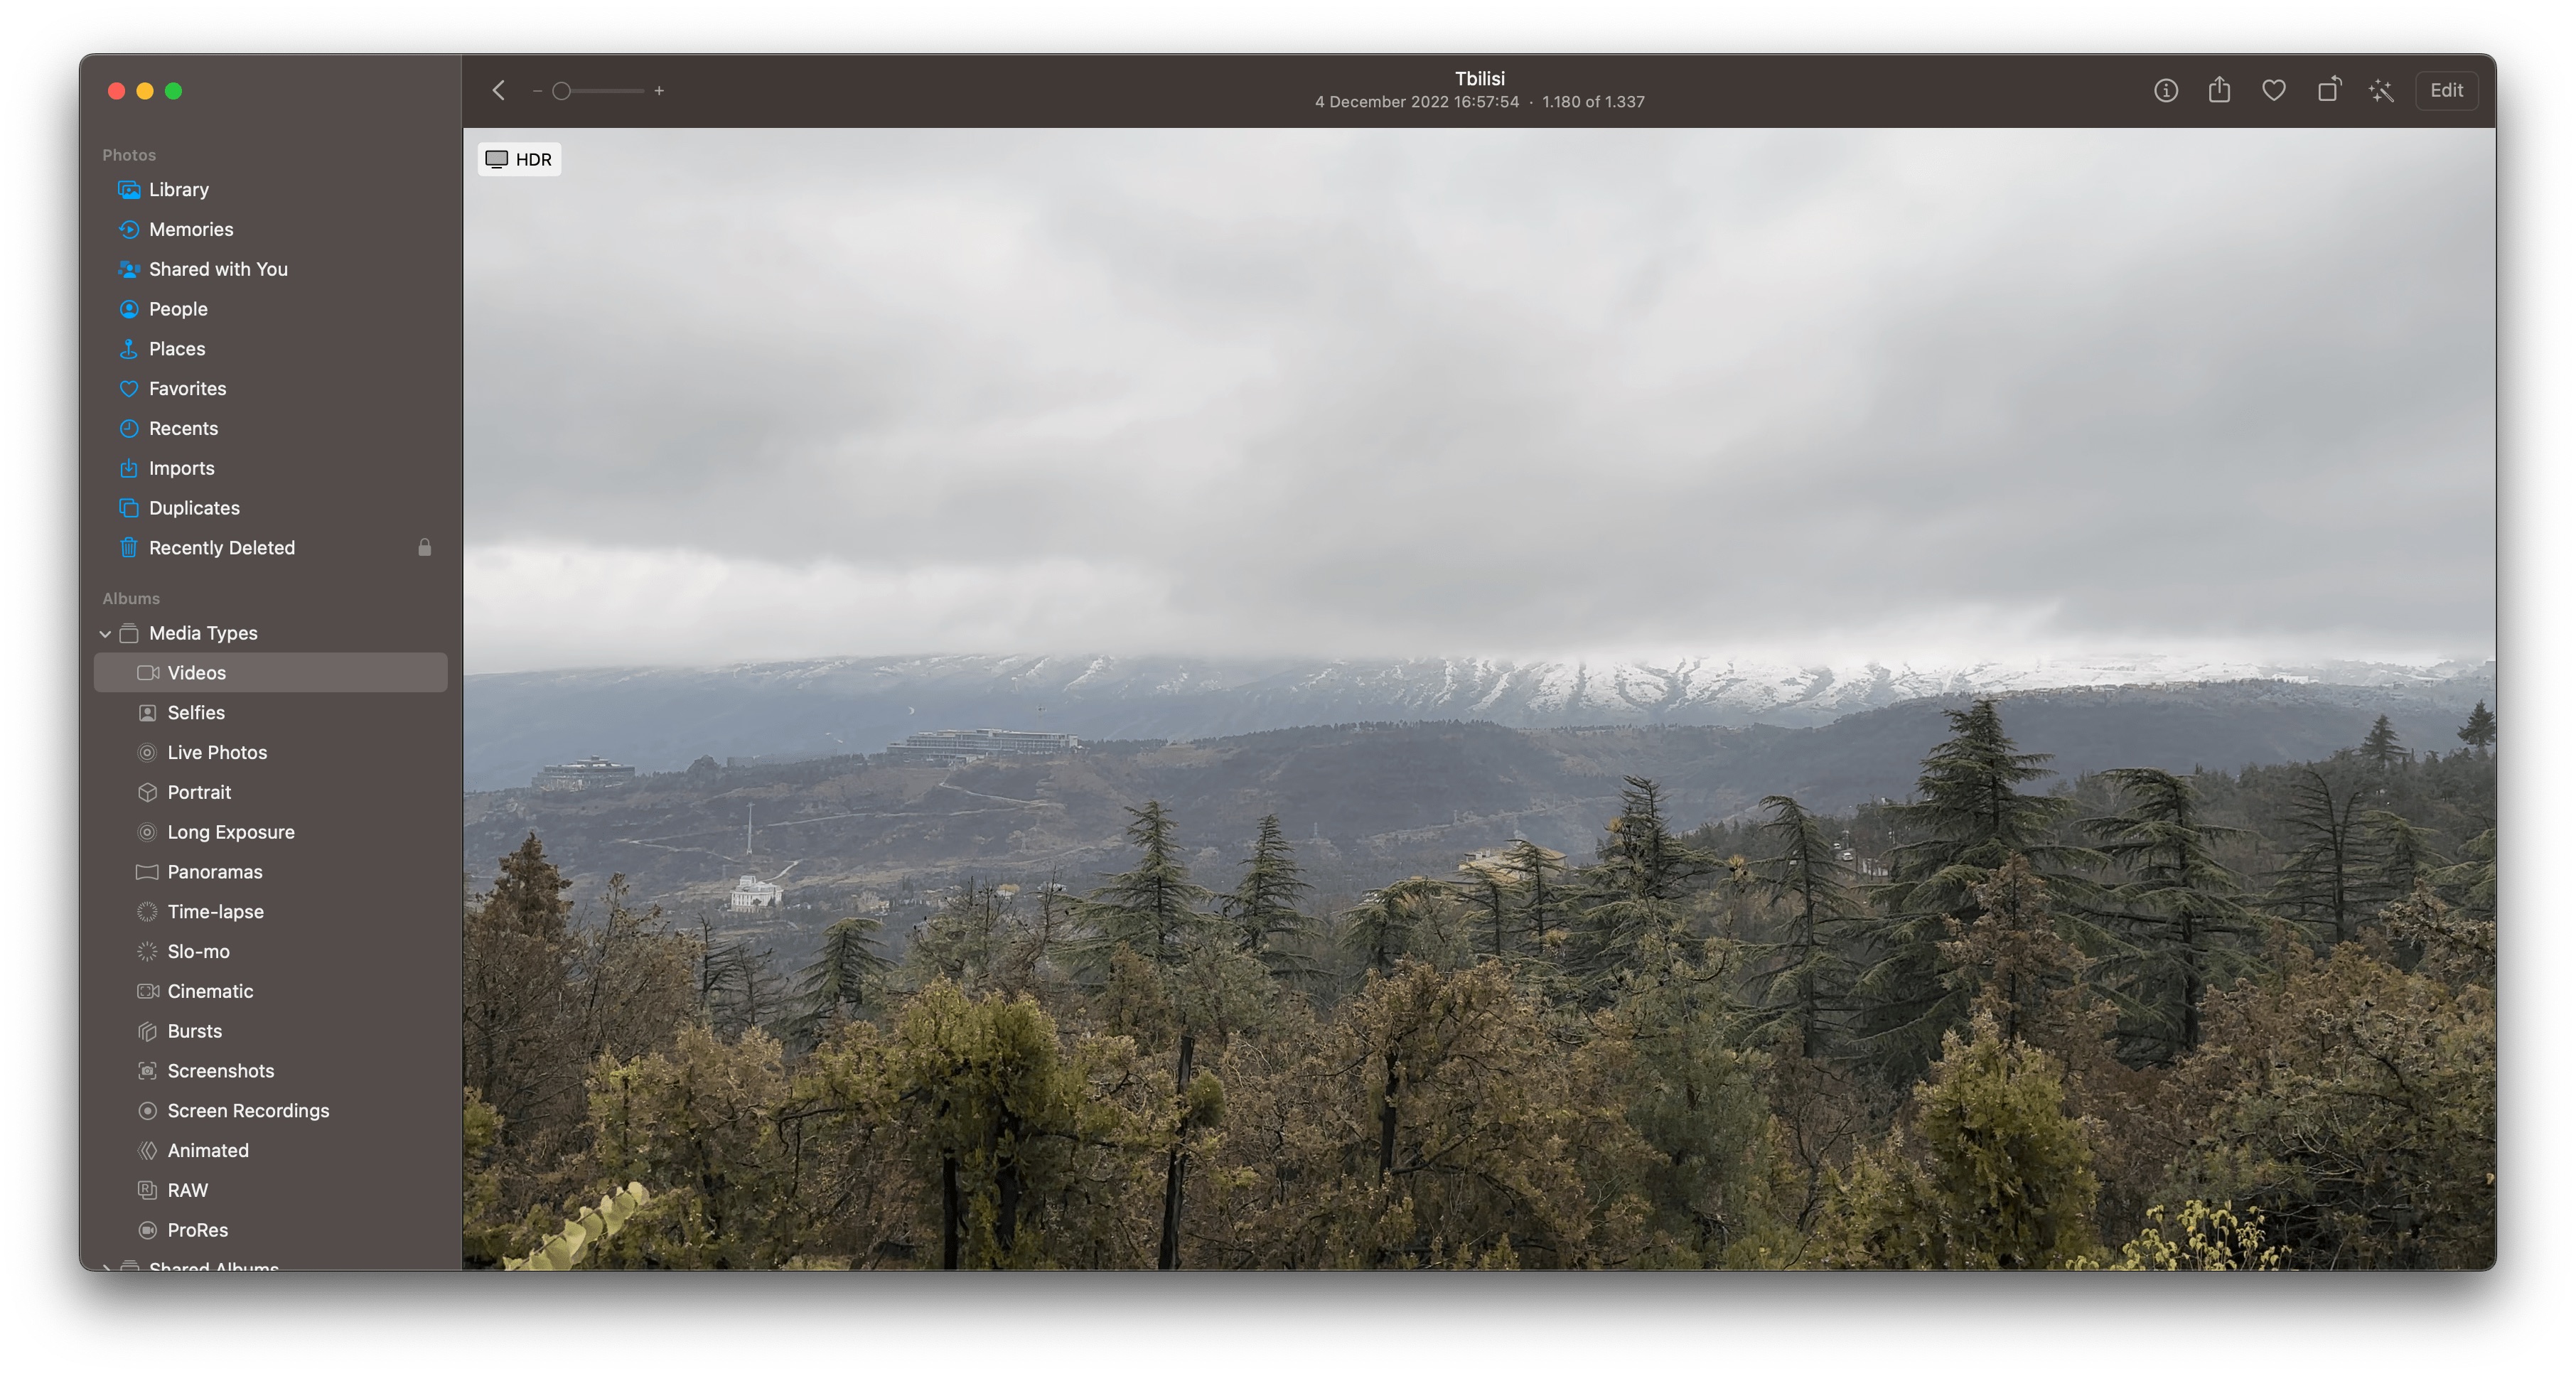 Are you seeing low quality previews in iCloud Photos? Here's how to get full resolution media